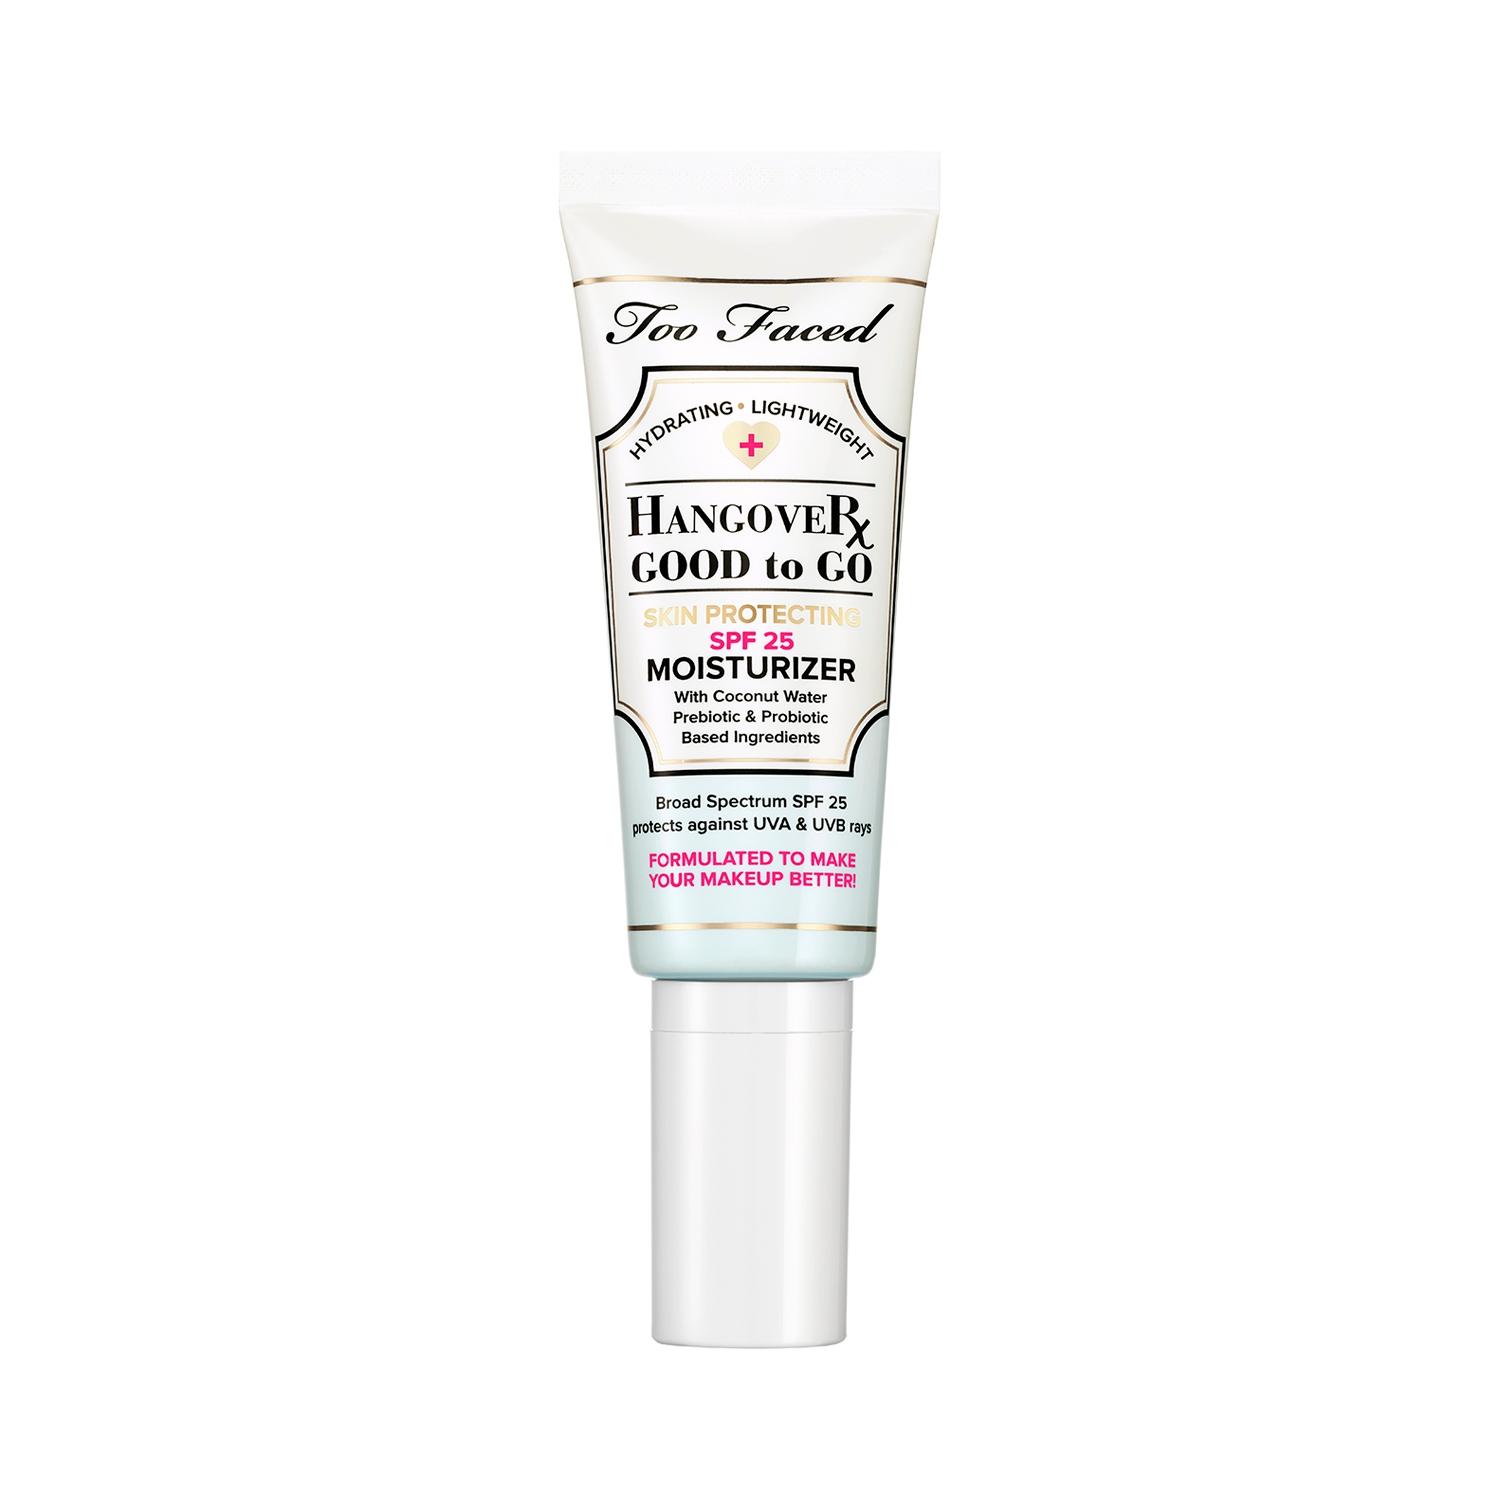 too-faced-hangover-good-to-go-skin-protecting-moisturizer-spf-25-(40ml)